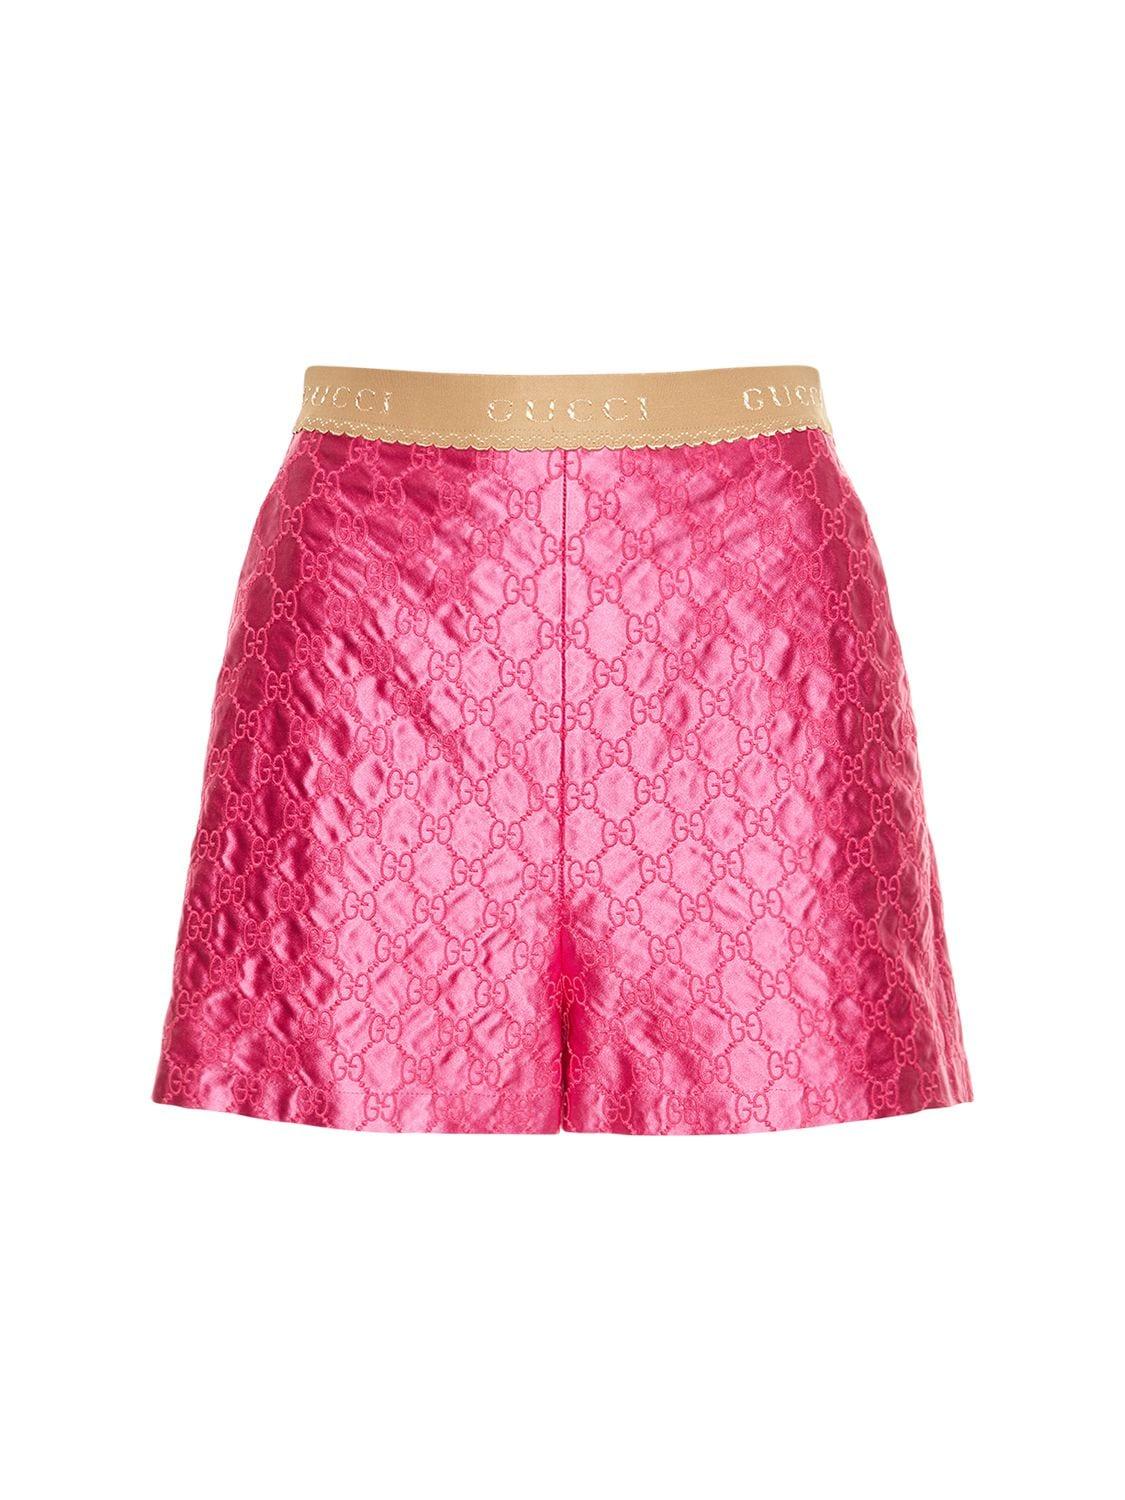 Gucci Gg Embroidered Silk Duchesse Shorts in Pink | Lyst